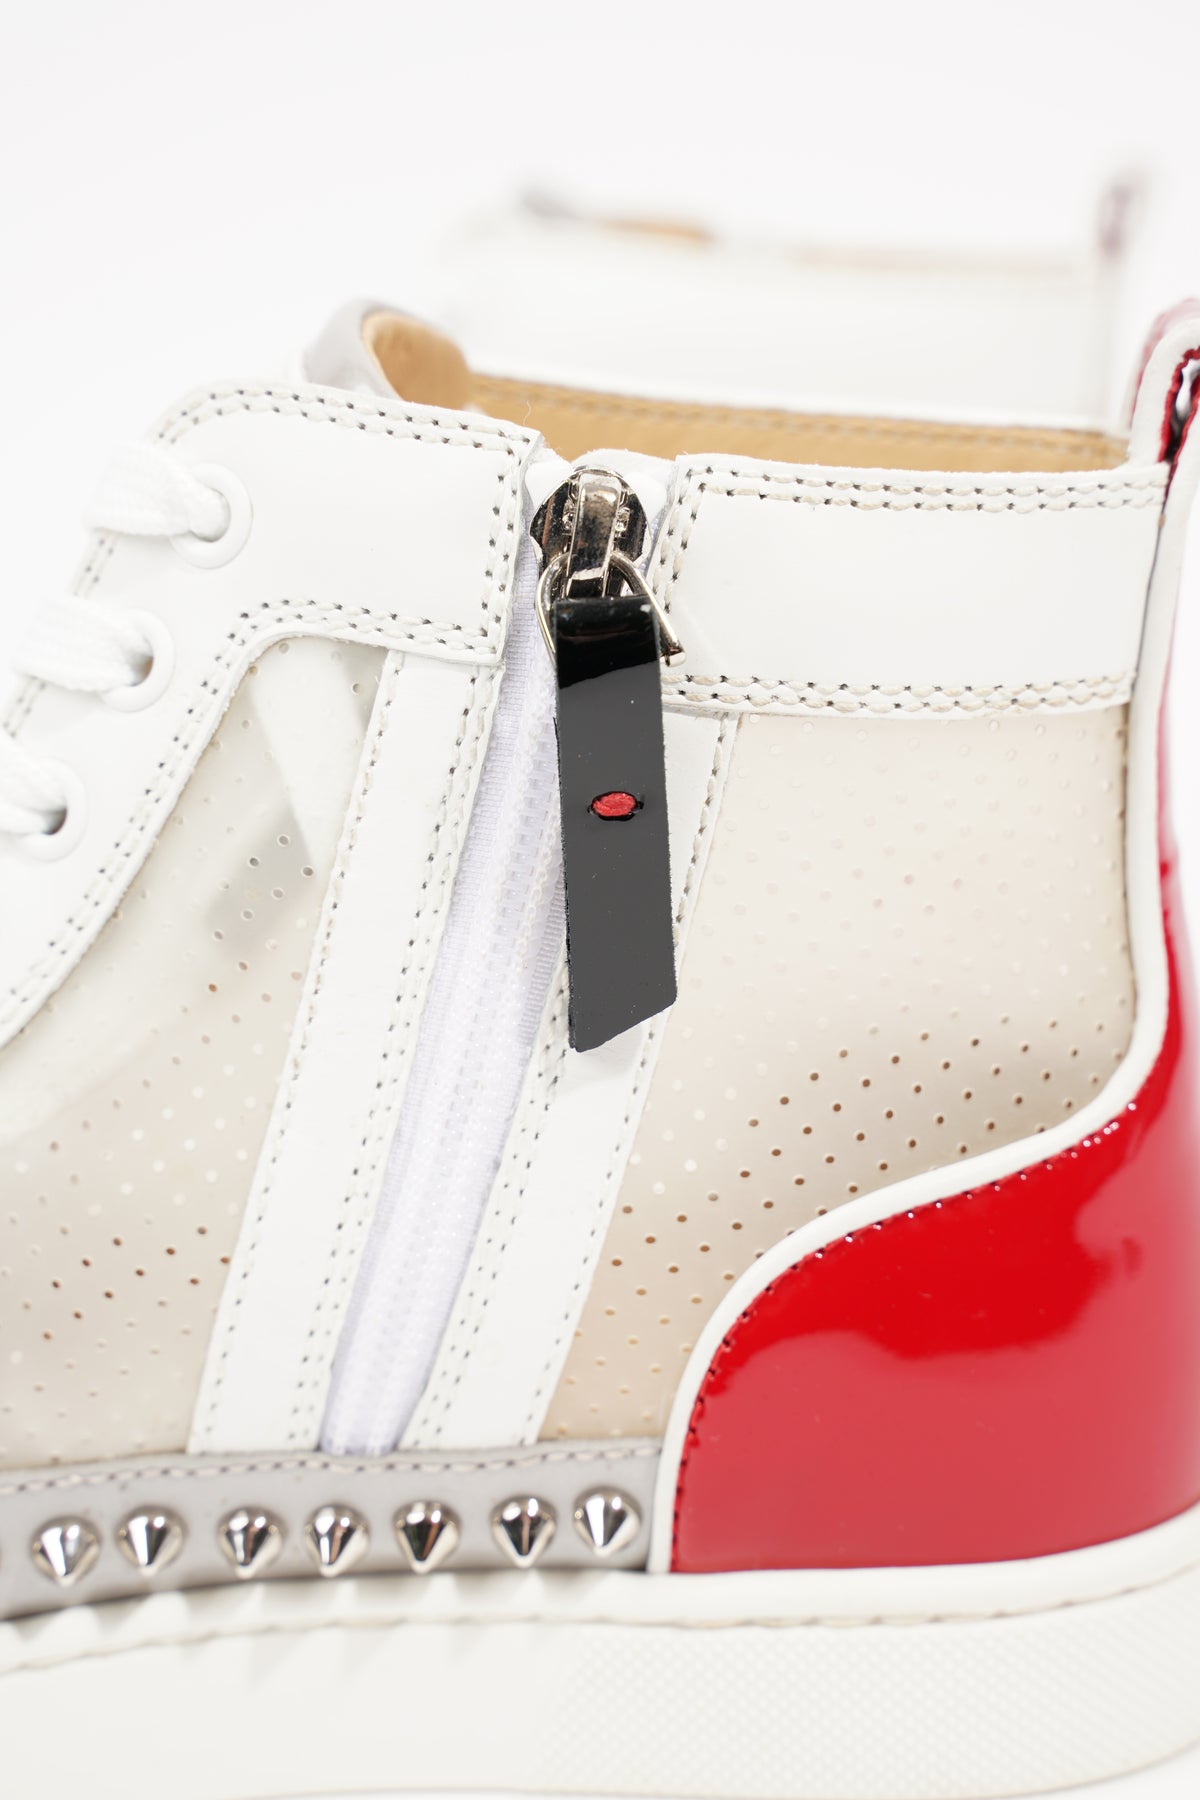 Christian Louboutin Sosoxy Spikes High-Top Sneakers in White